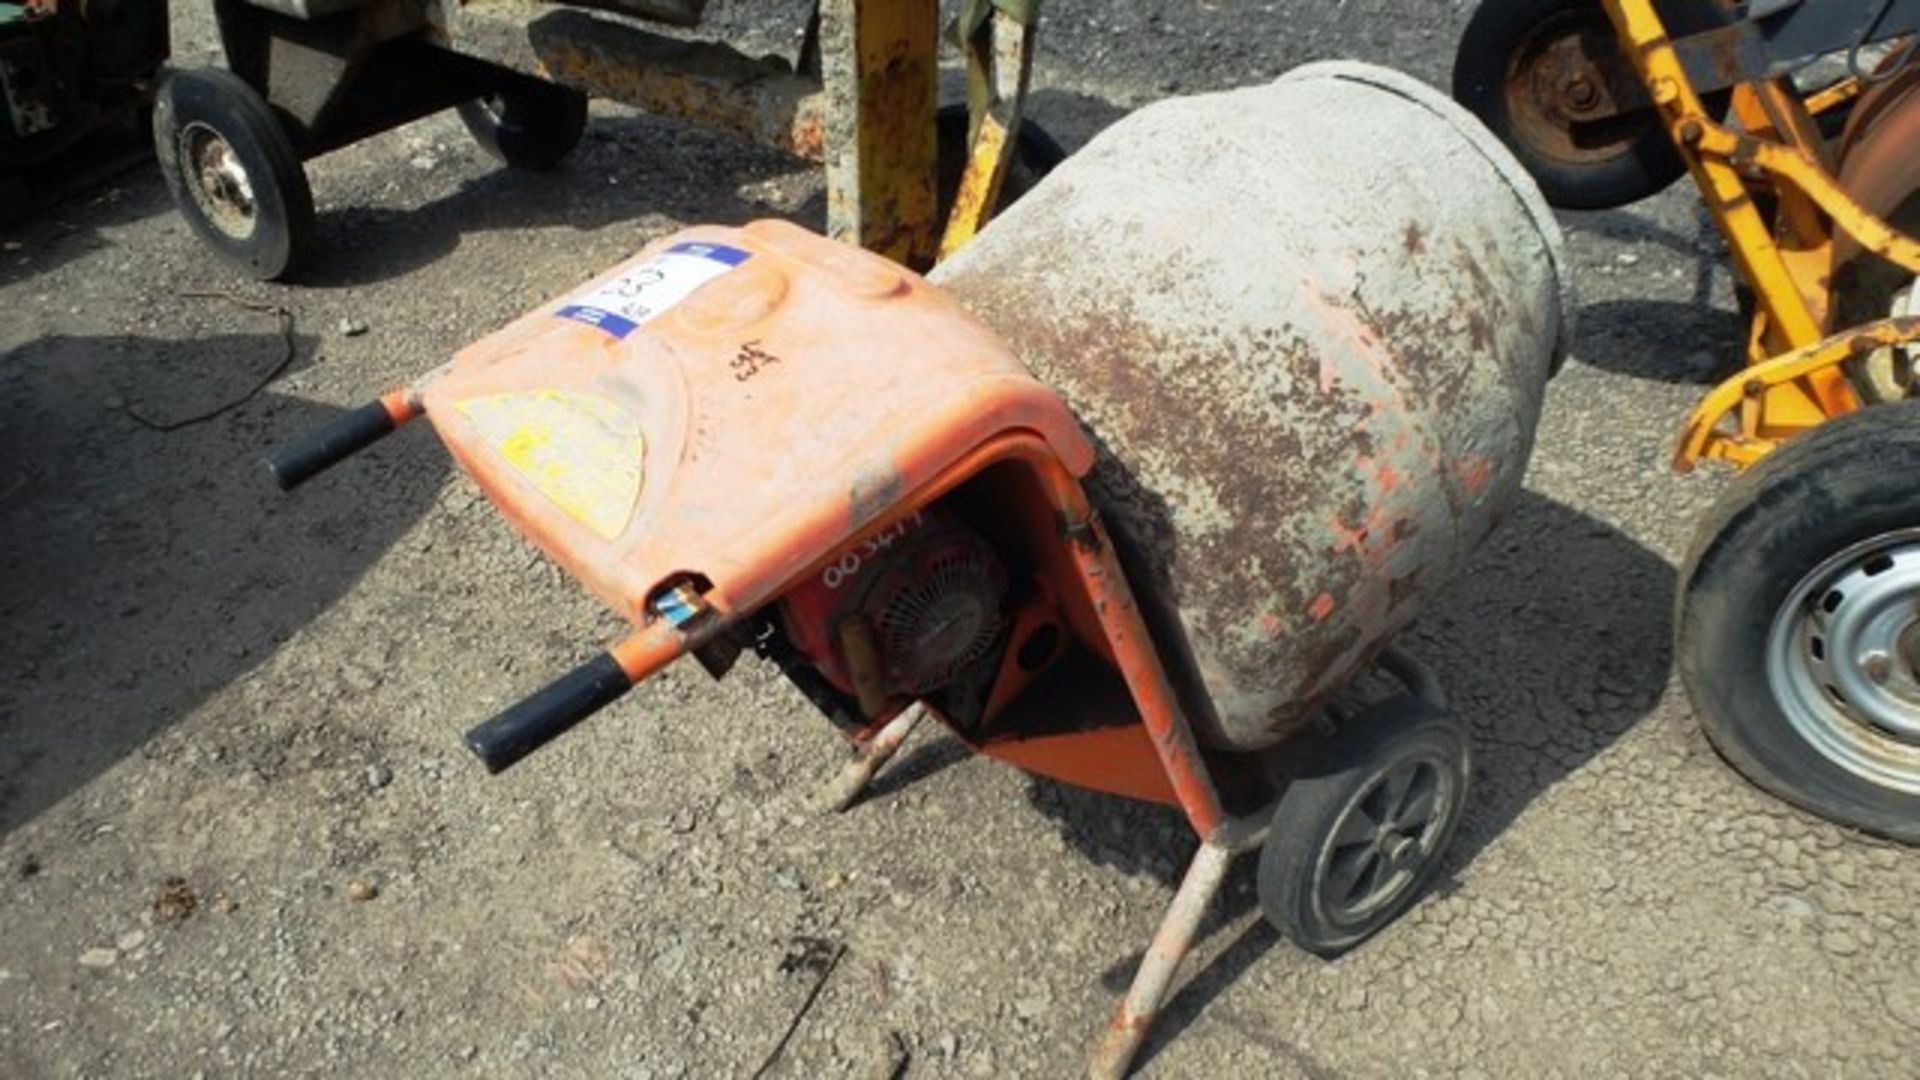 BELLE MINIMIX/150 PETROL CEMENT MIXER C/W HONDA ENGINE, REF 3618/3419****DIRECT FROM COUNCIL*****